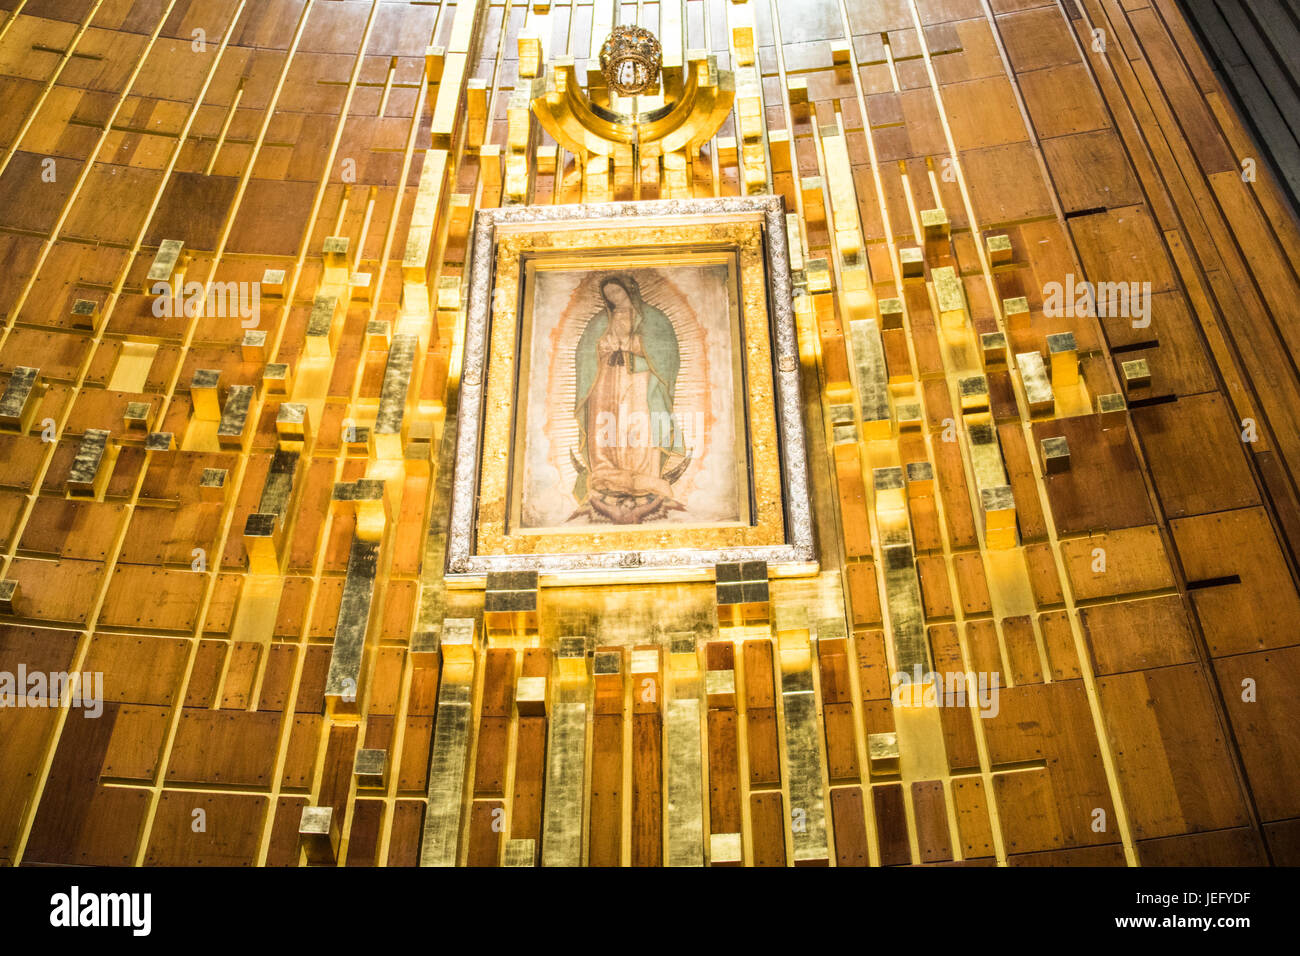 Our Lady of Guadalupe, Basilica de Guadalupe, Mexico City, Mexico Stock Photo